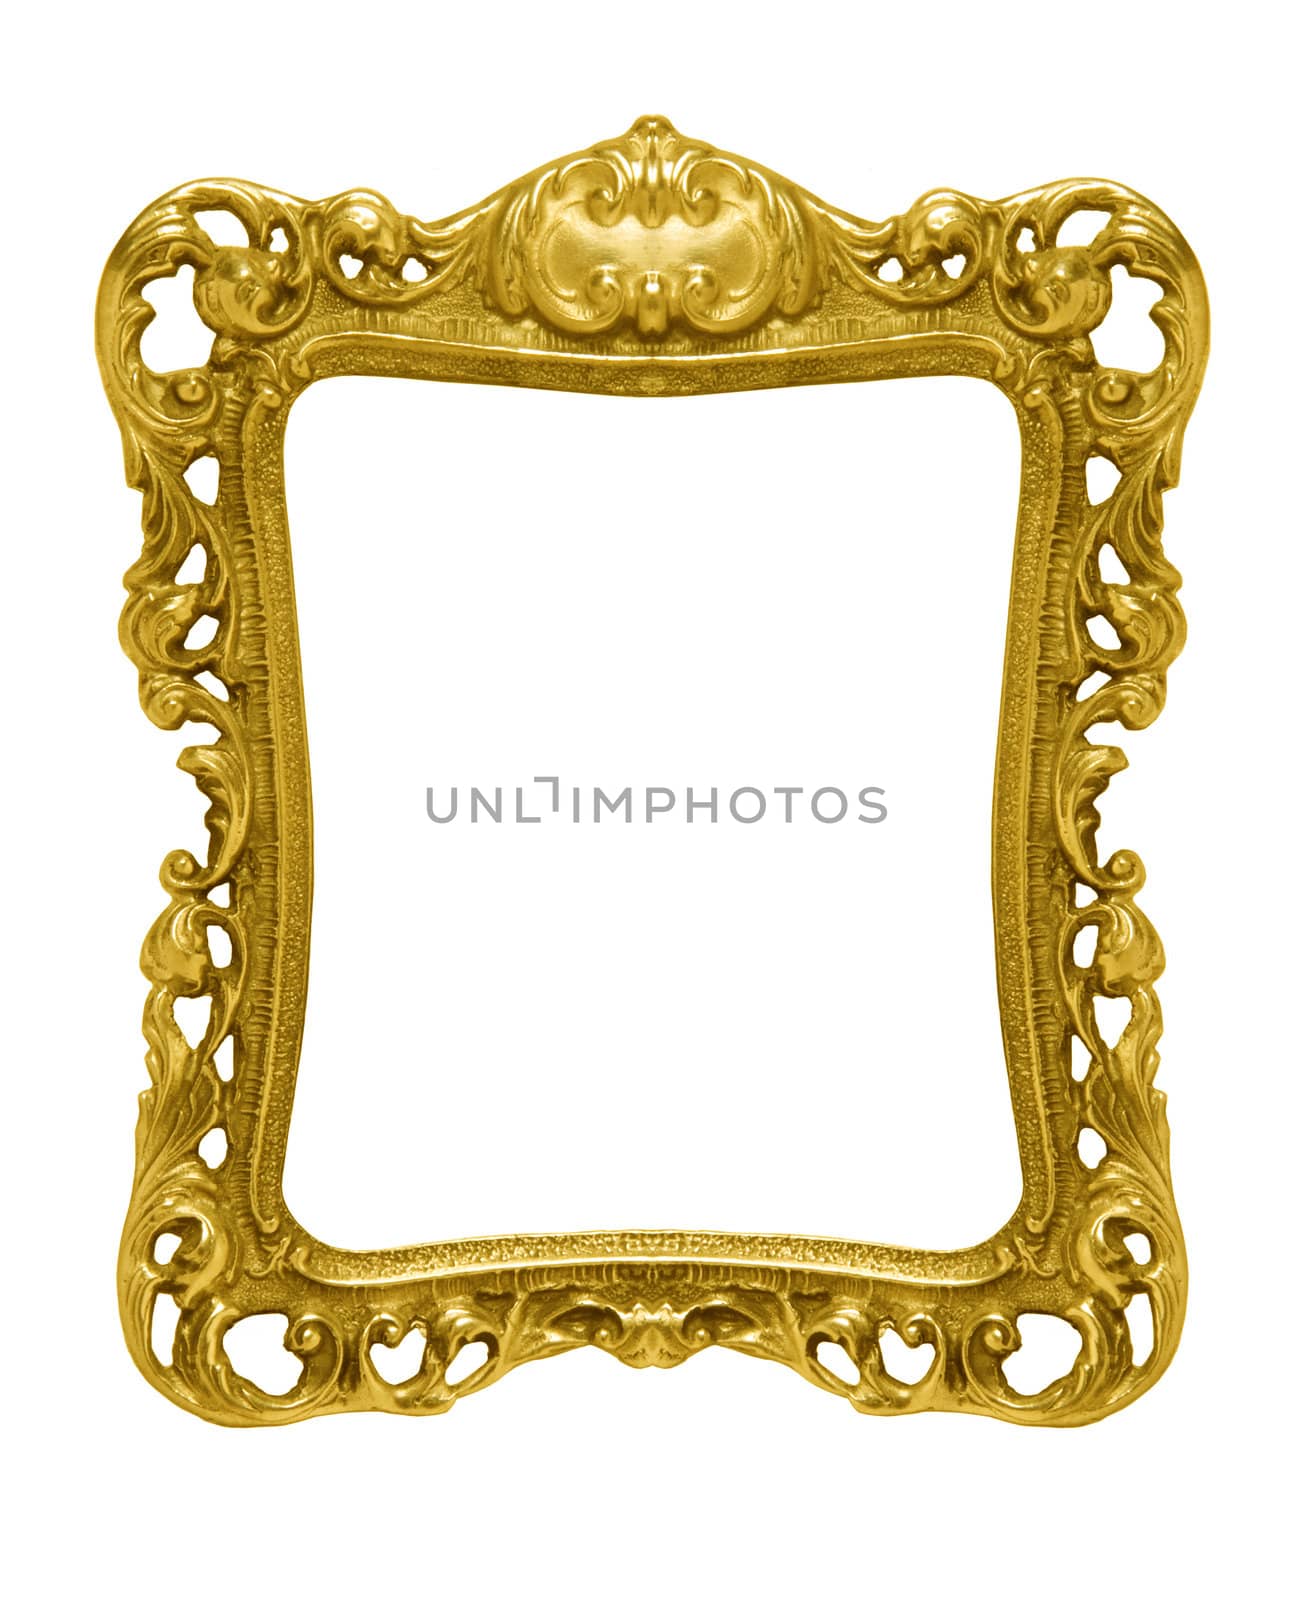 An ornate gold picture frame silhouetted against a white background